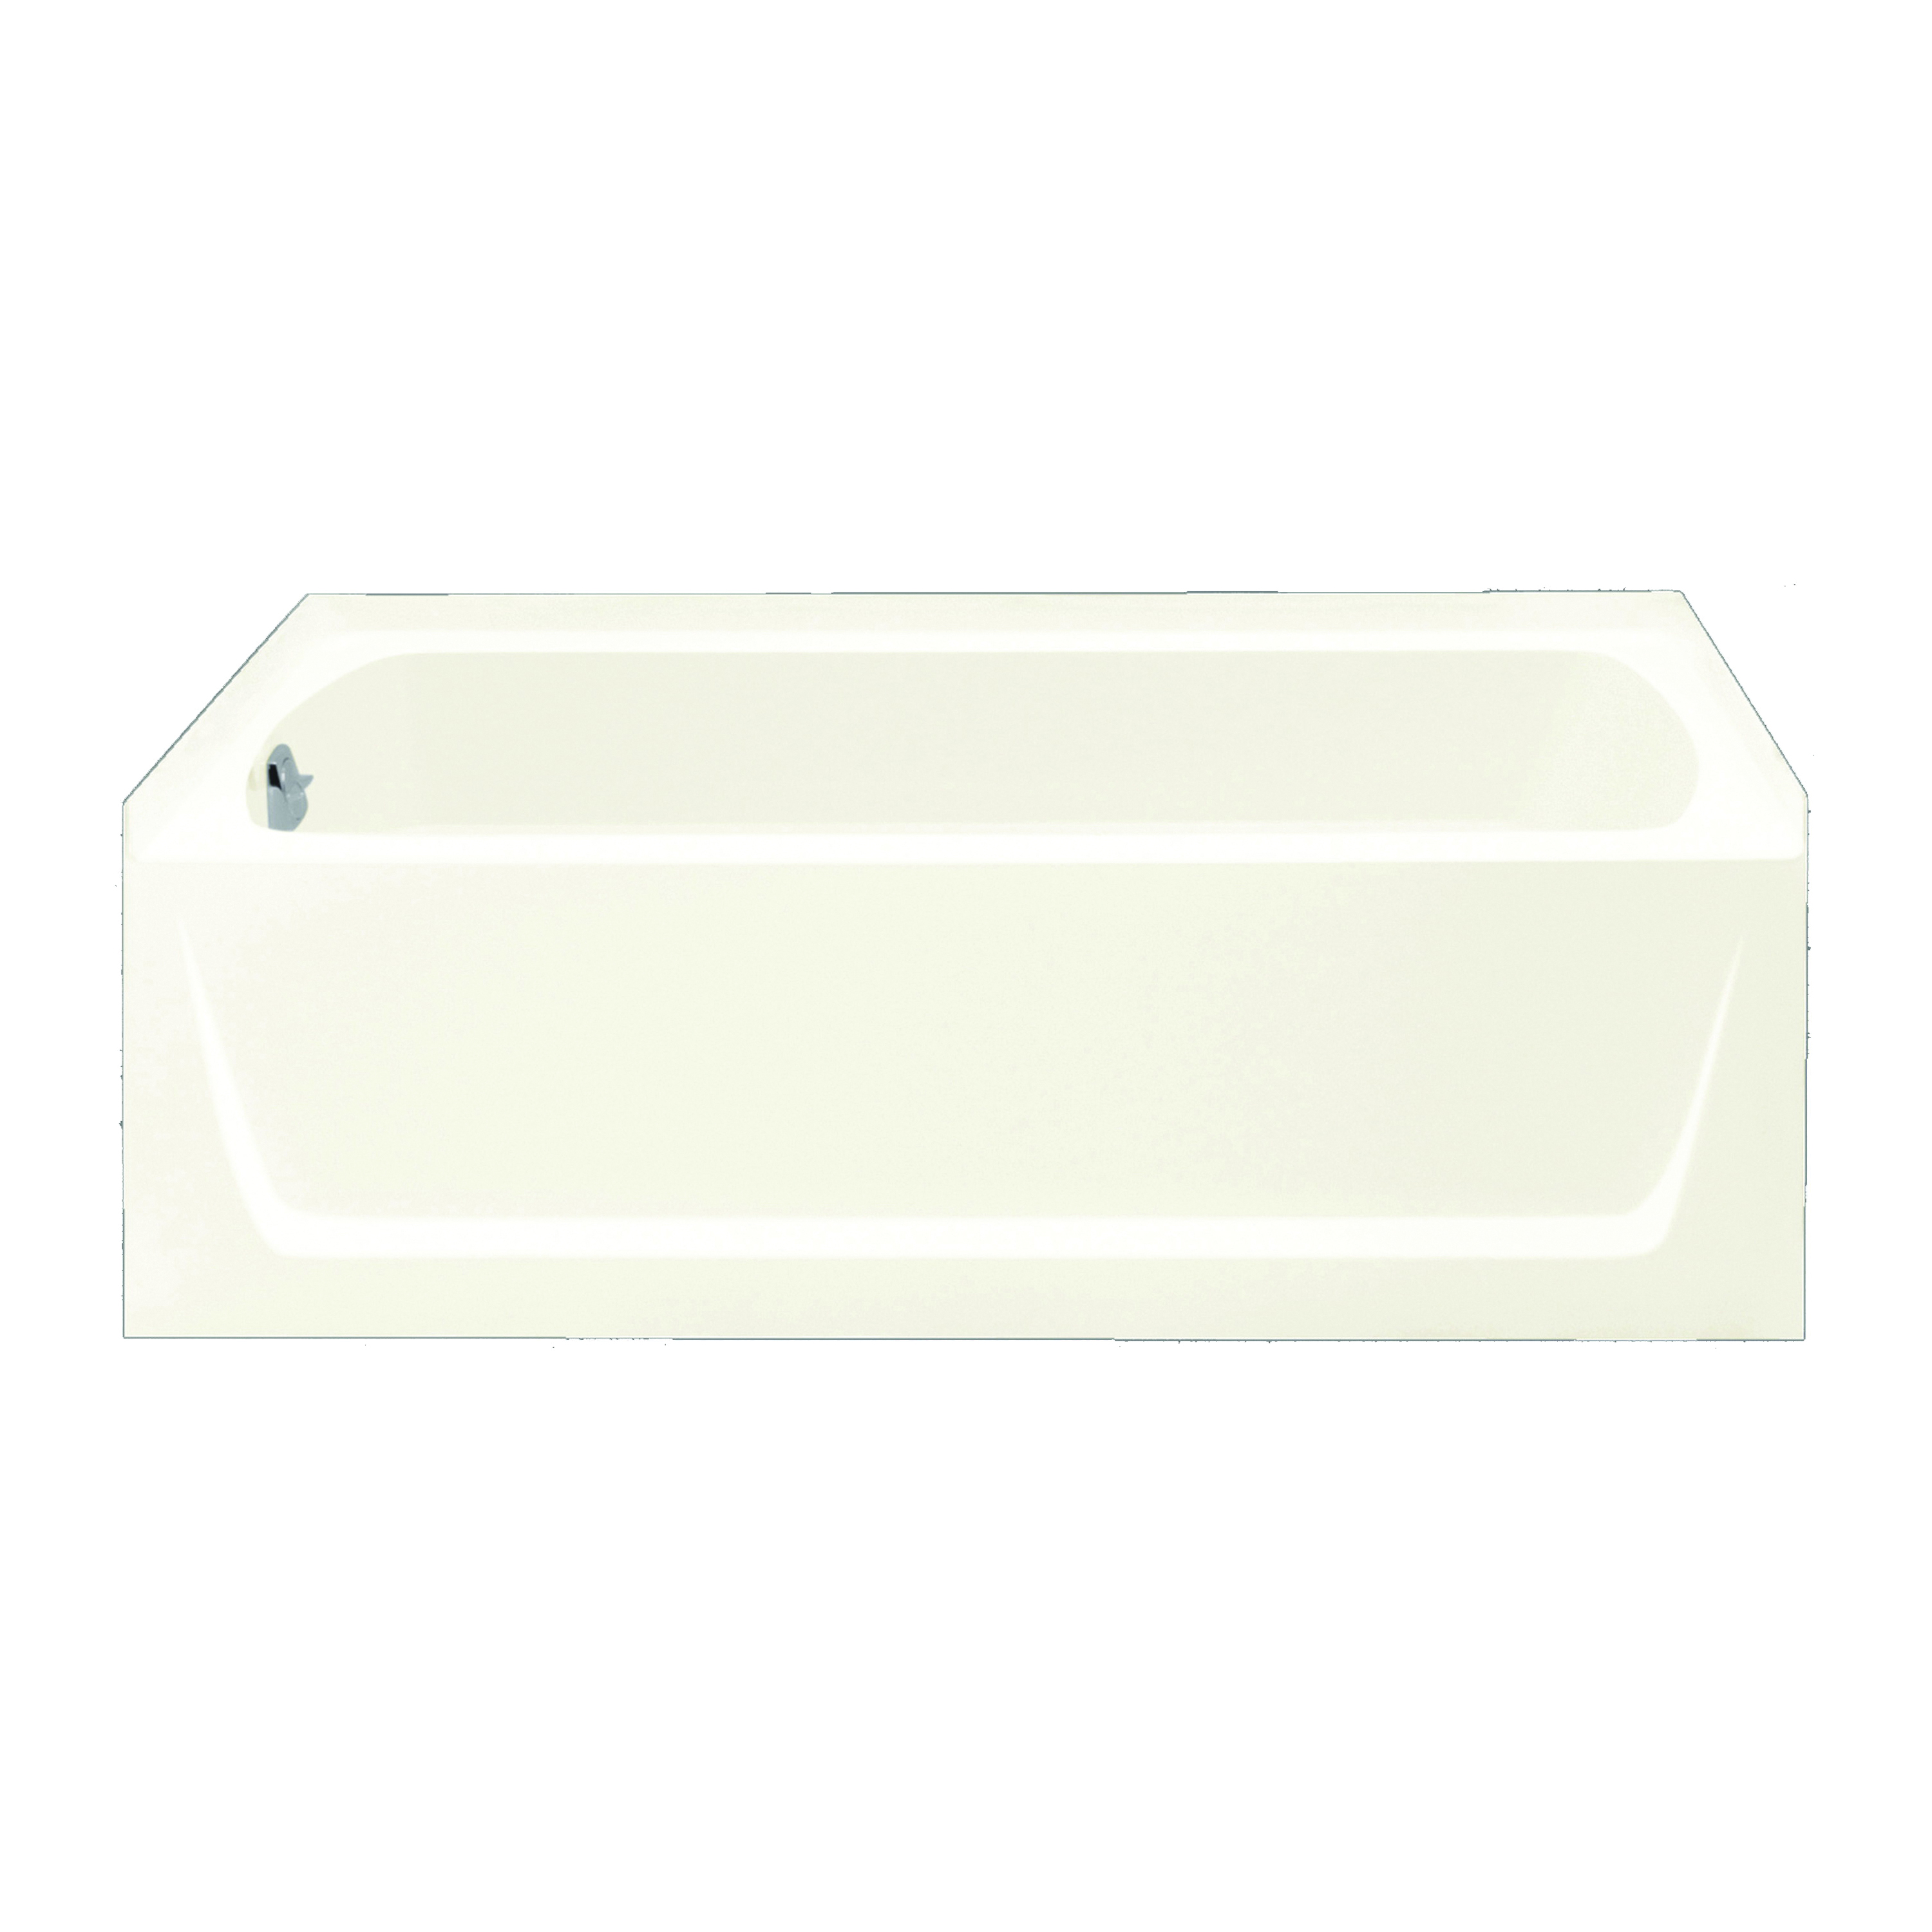 Ensemble 71171110-0 Bathtub, 44 gal Capacity, 60 in L, 30 in W, 18 in H, Alcove Installation, Vikrell, White